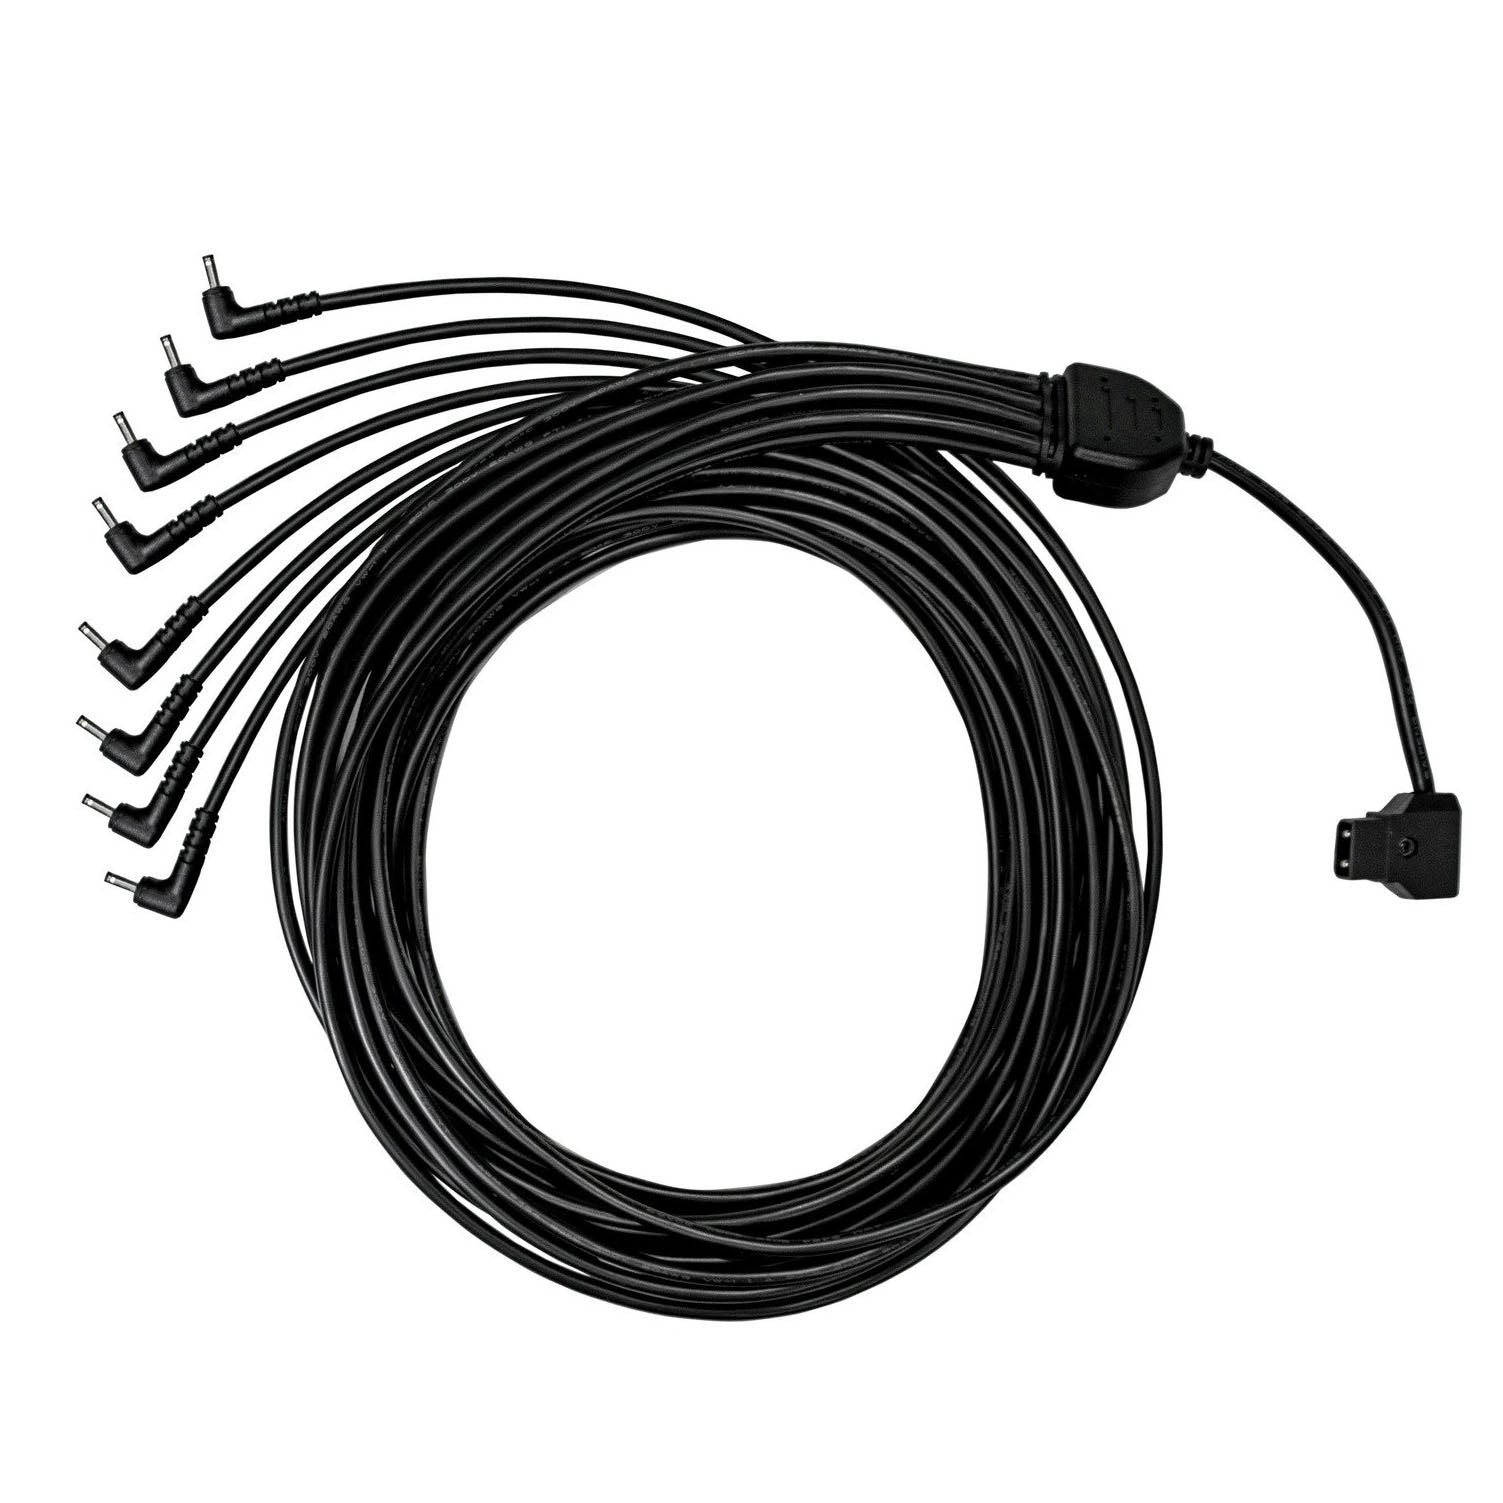 Astera D-Tap Split Cable for FP5